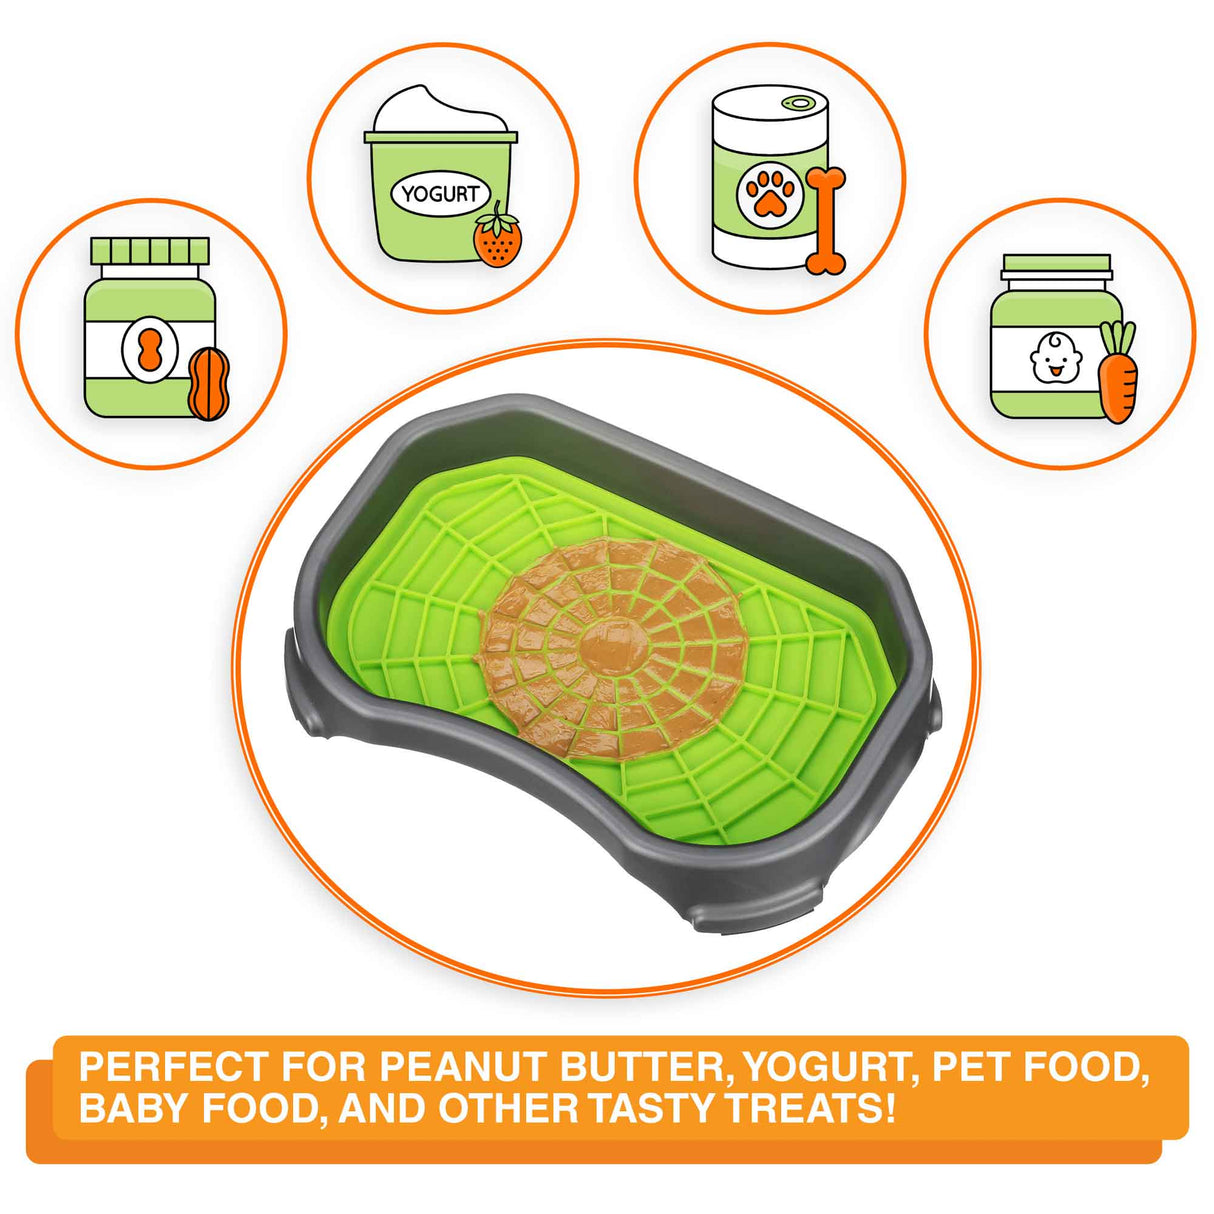 The Neat-Lik Mat is perfect for peanut butter, yogurt, pet food, baby food and other treats.